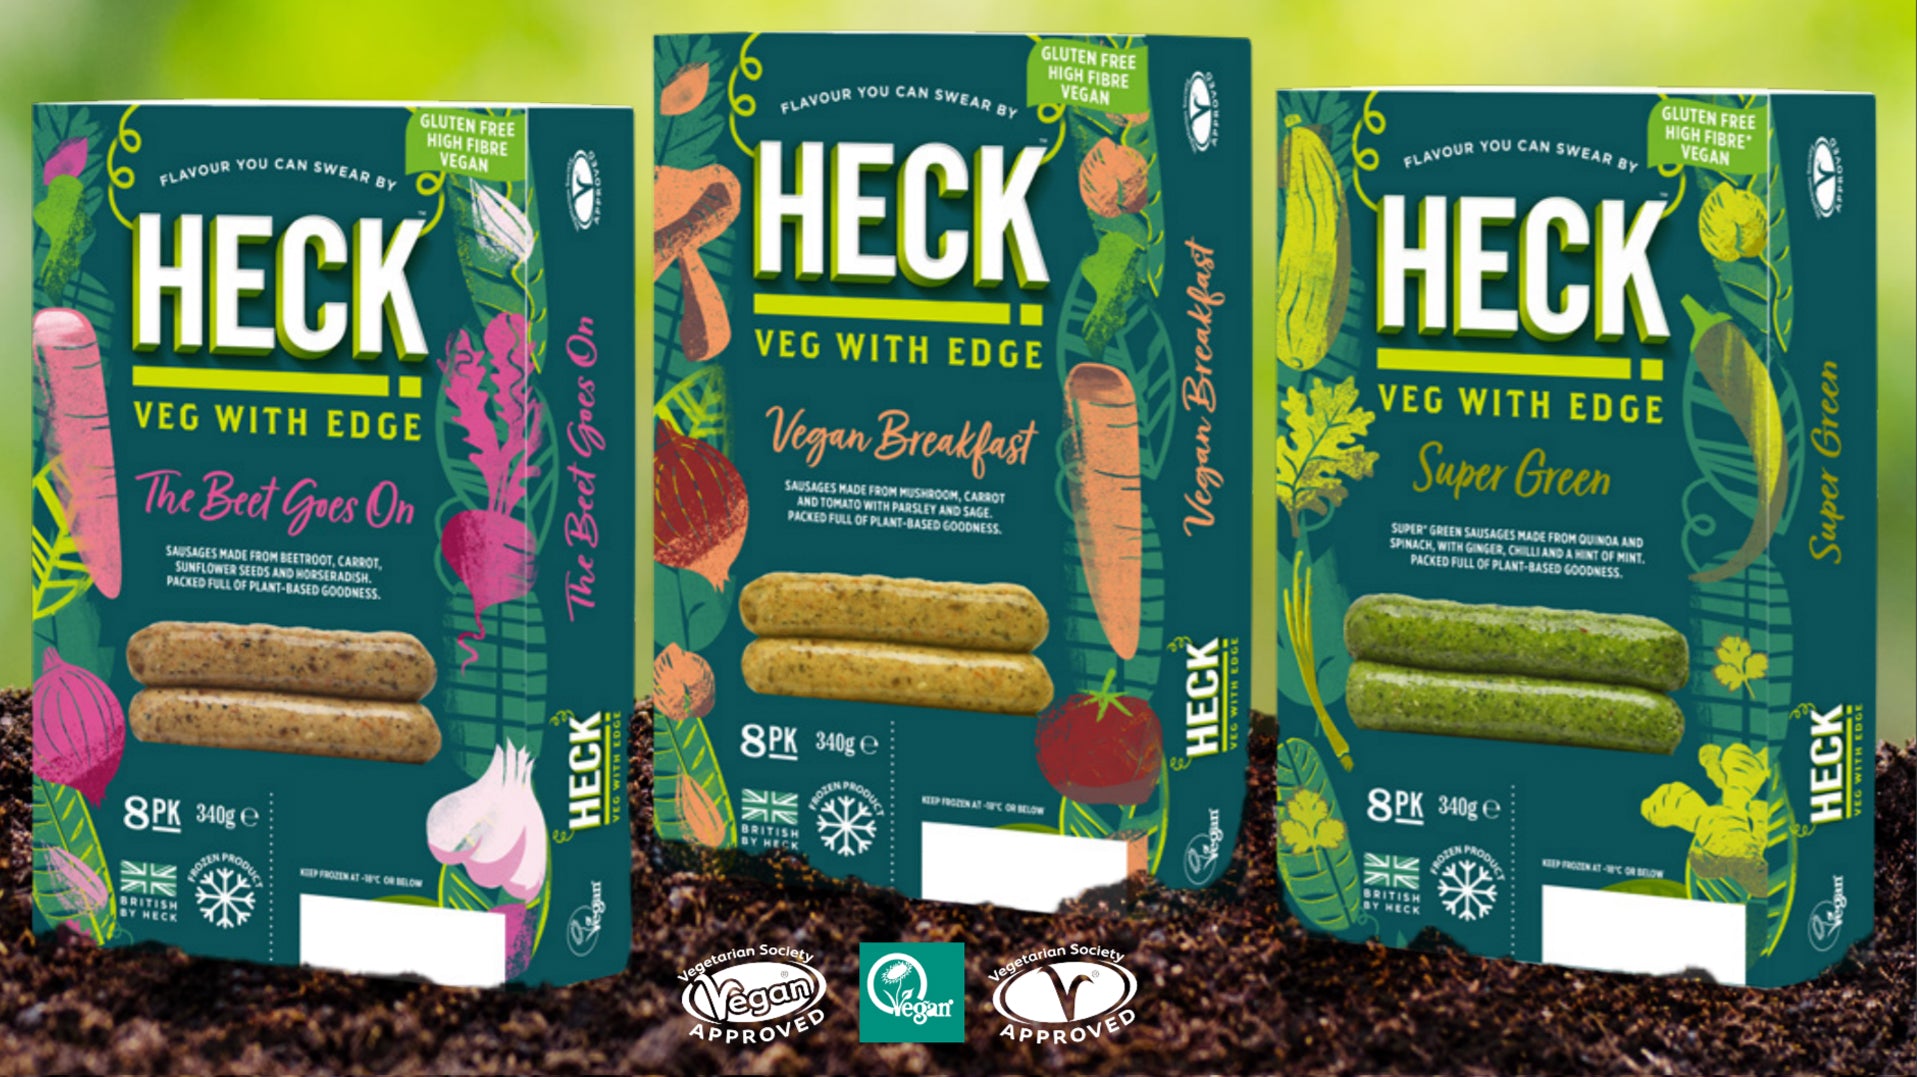 Find out more about the new HECK Frozen Vegan Range